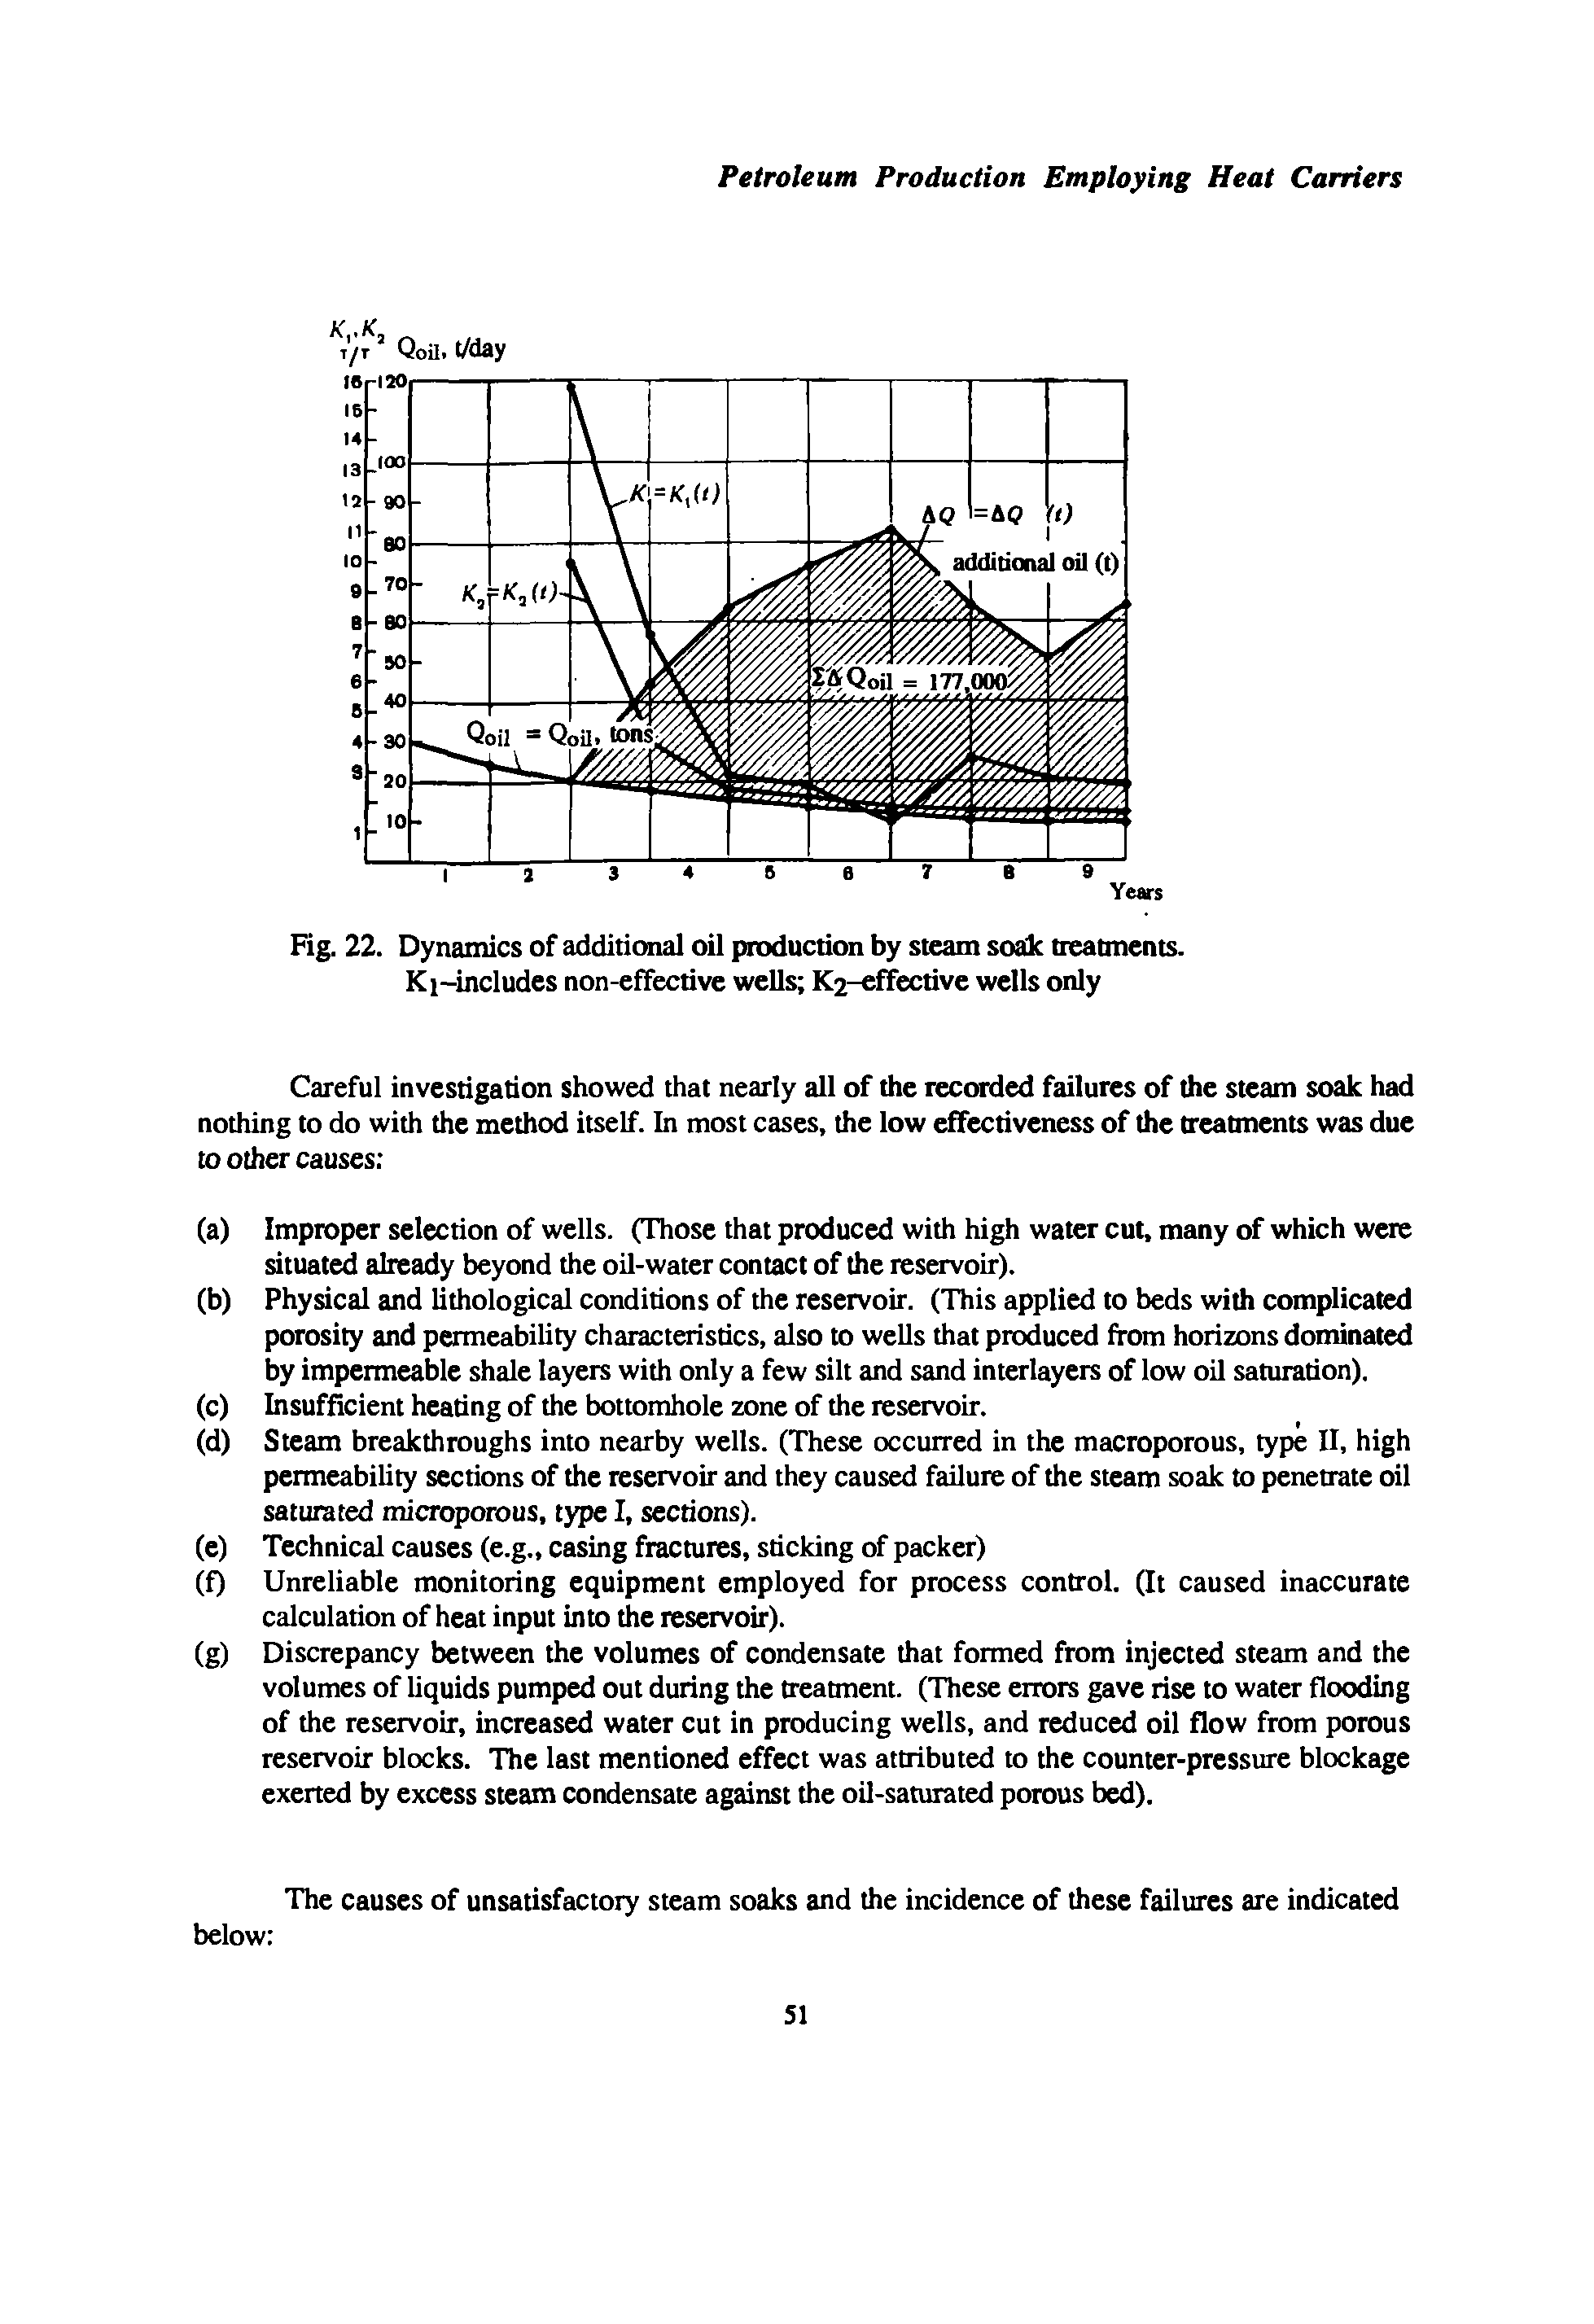 Fig. 22. Dynamics of additional oil production by steam soak treatments. Ki-includes non-effective wells K2-effective wells only...